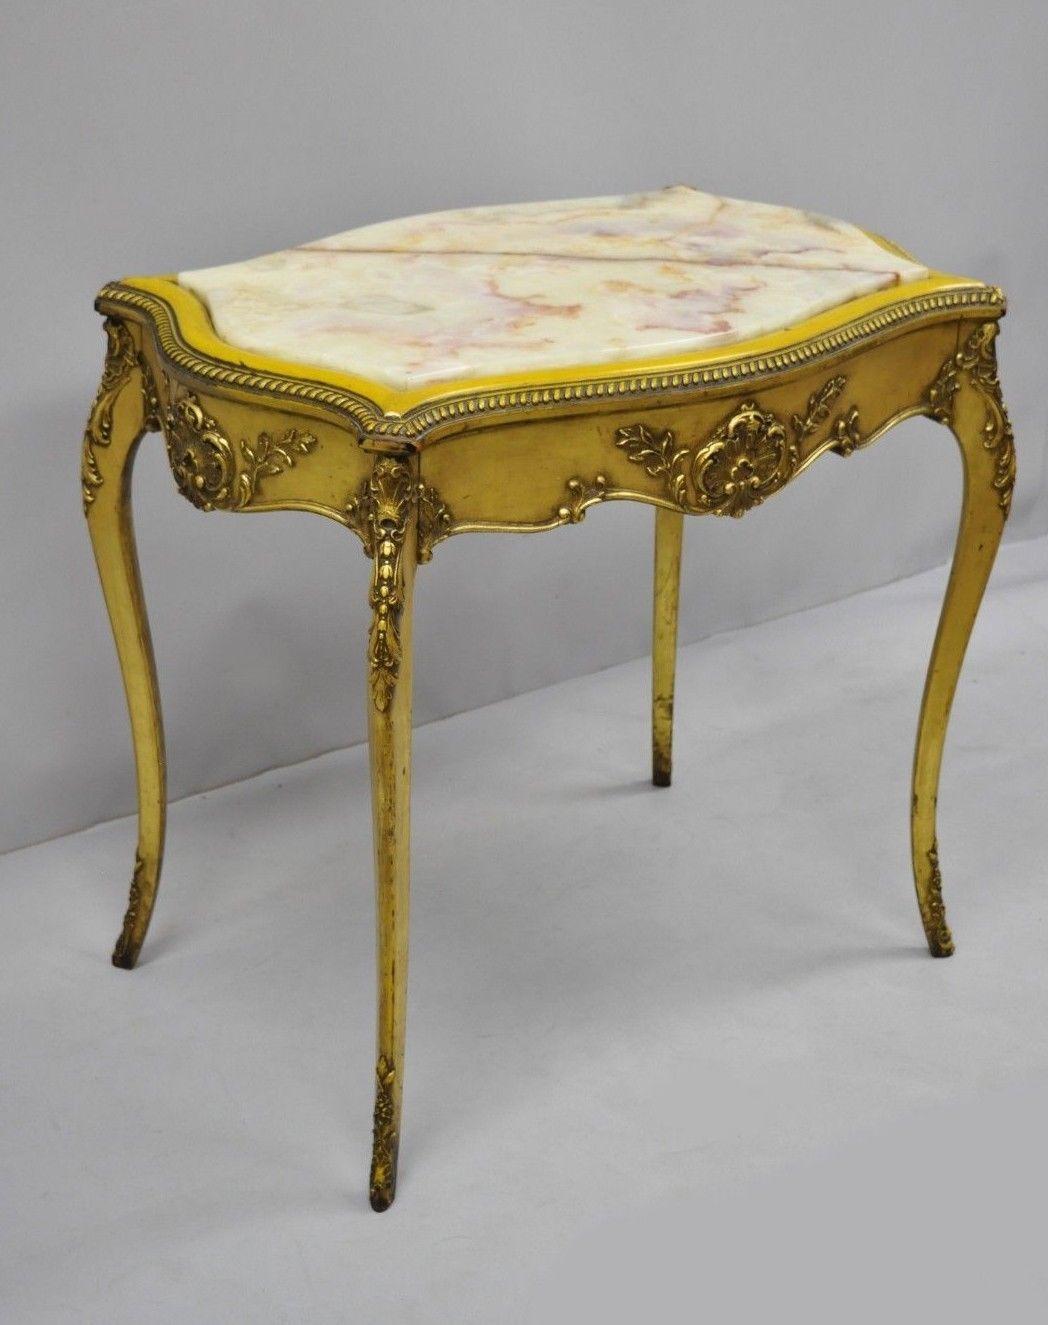 19th century French Louis XV style onyx stone turtle top table. Item features stunning shaped onyx stone top, shell carved and acanthus scrollwork gesso, yellow and gold finish, distressed finish, cabriole legs, very nice antique item, circa late